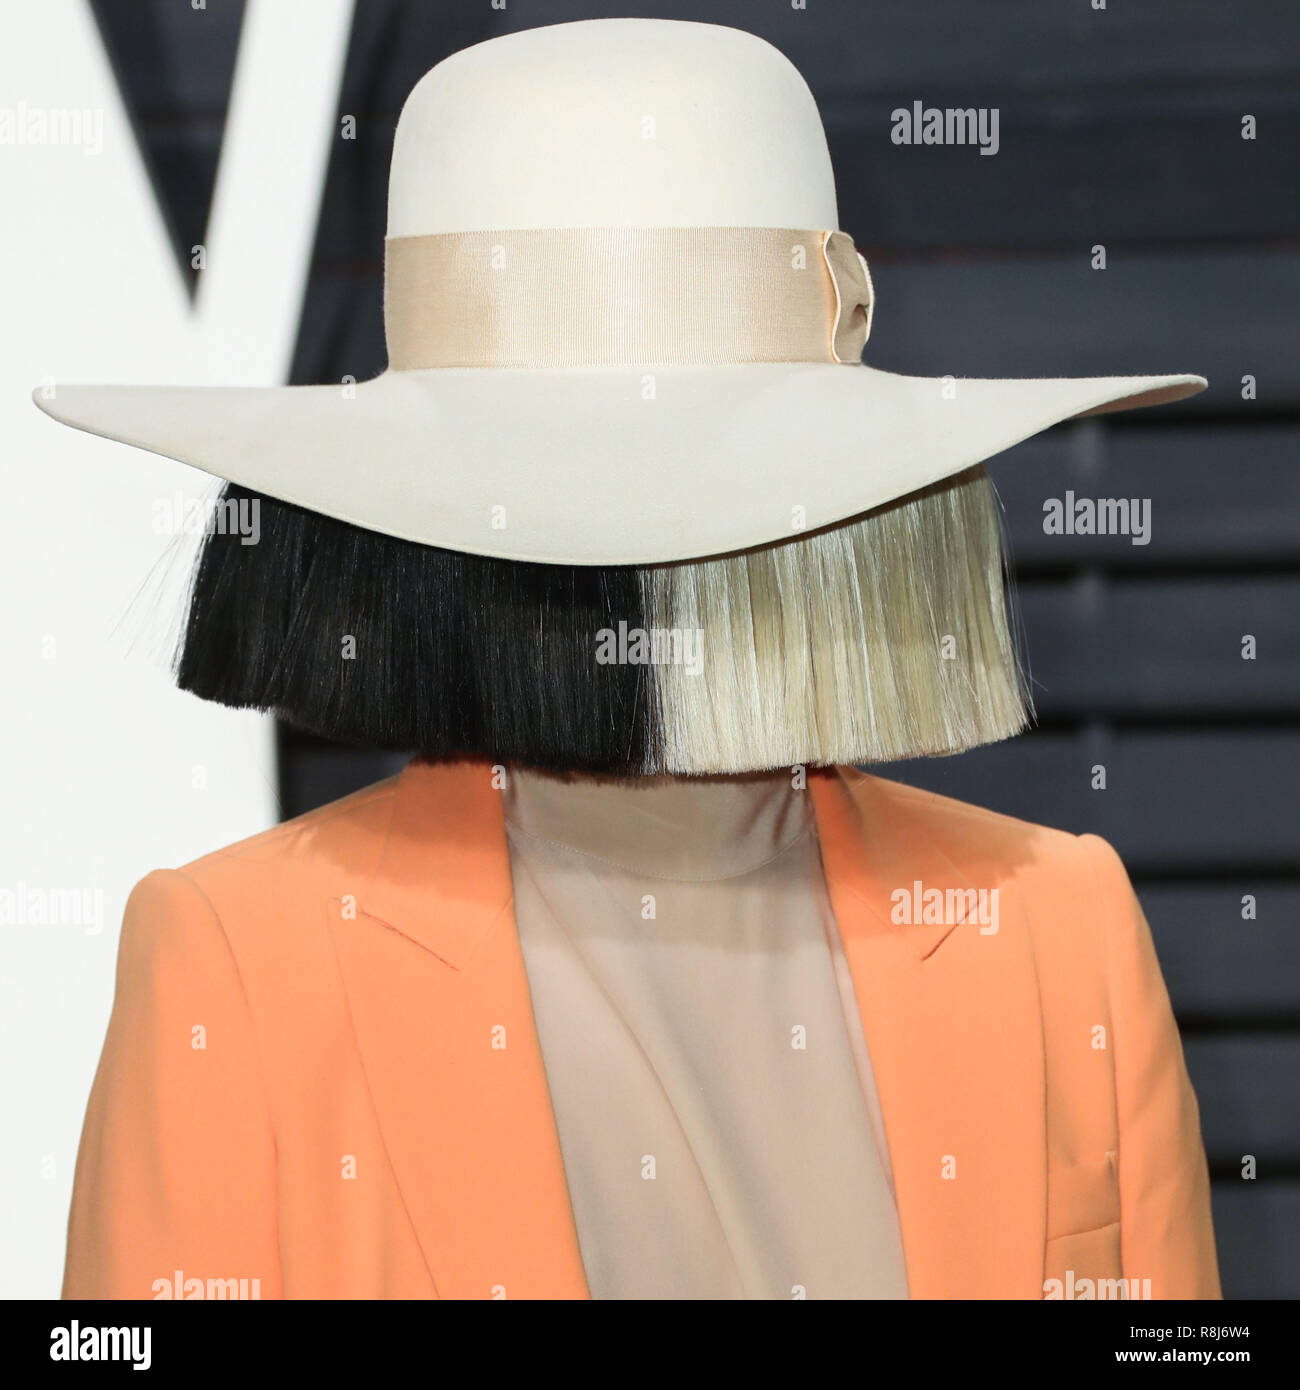 BEVERLY HILLS, LOS ANGELES, CA, USA - FEBRUARY 26: Sia, Sia Kate Isobelle Furler arrives at the 2017 Vanity Fair Oscar Party held at the Wallis Annenberg Center for the Performing Arts on February 26, 2017 in Beverly Hills, Los Angeles, California, United States. (Photo by Xavier Collin/Image Press Agency) Stock Photo